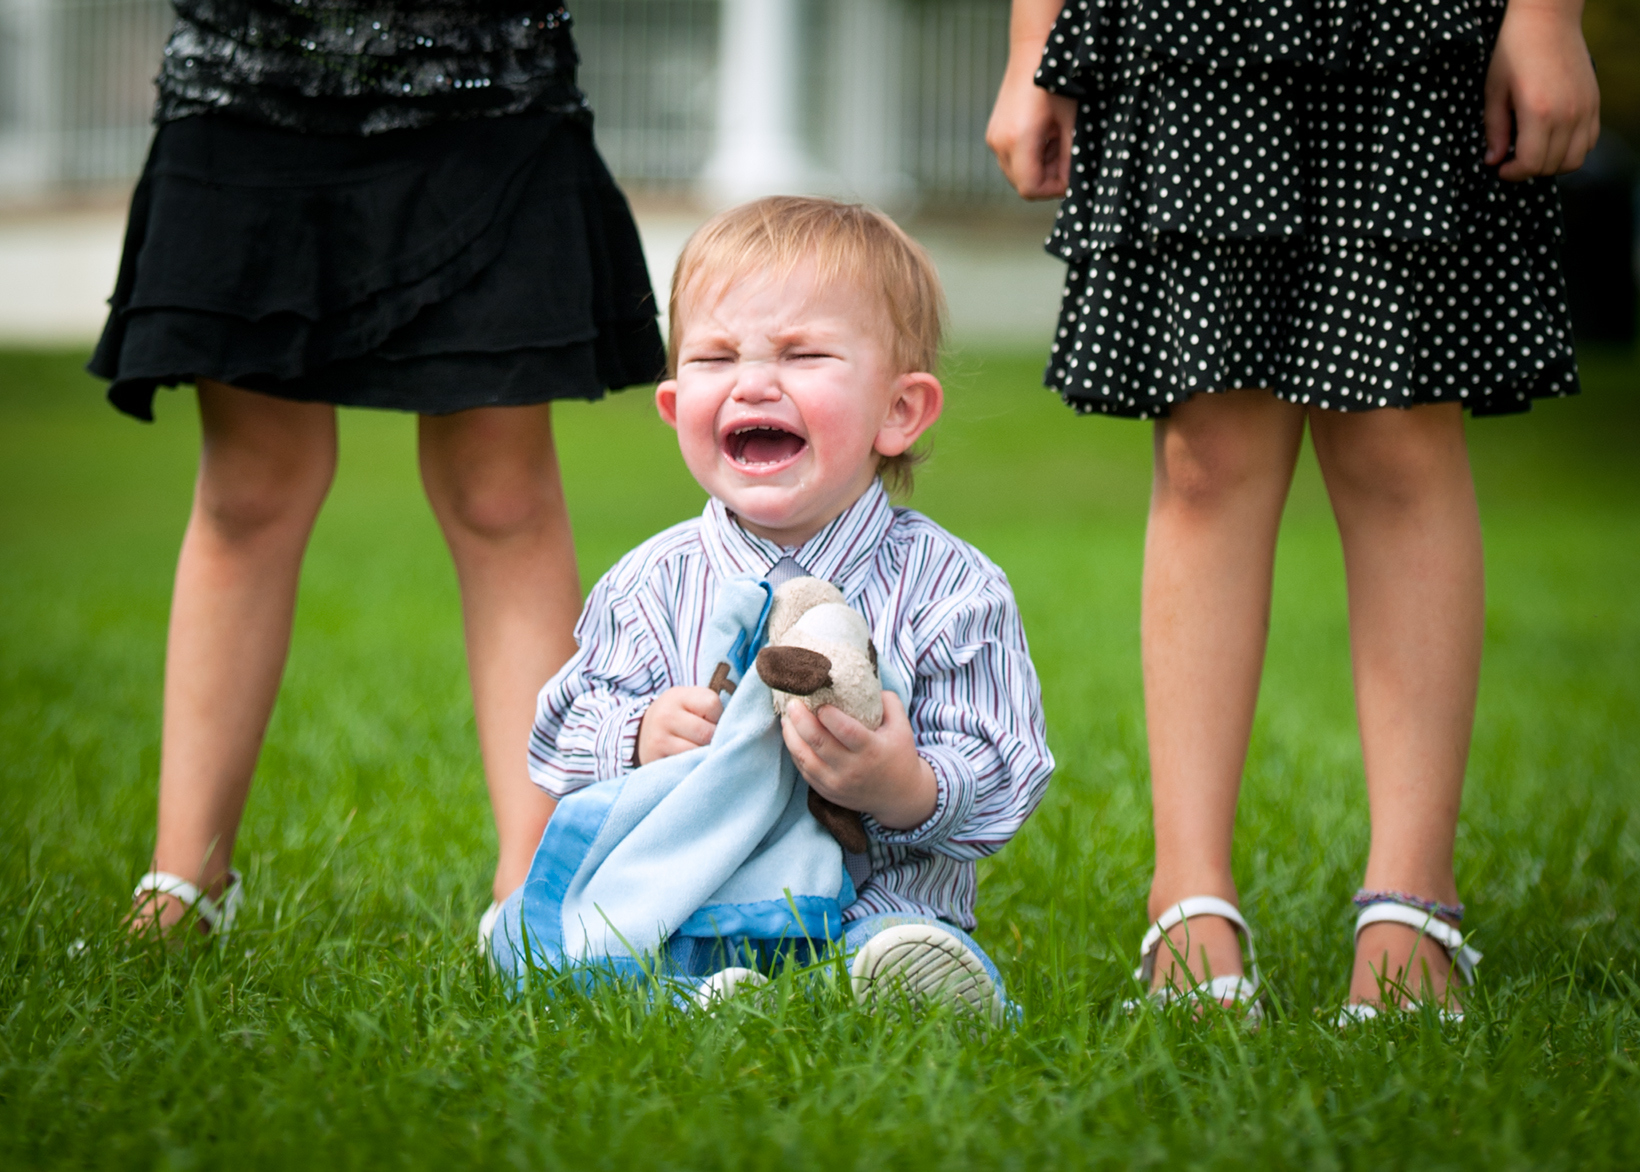 Toddler crying on grass between two people, holding a blanket and wearing a striped shirt